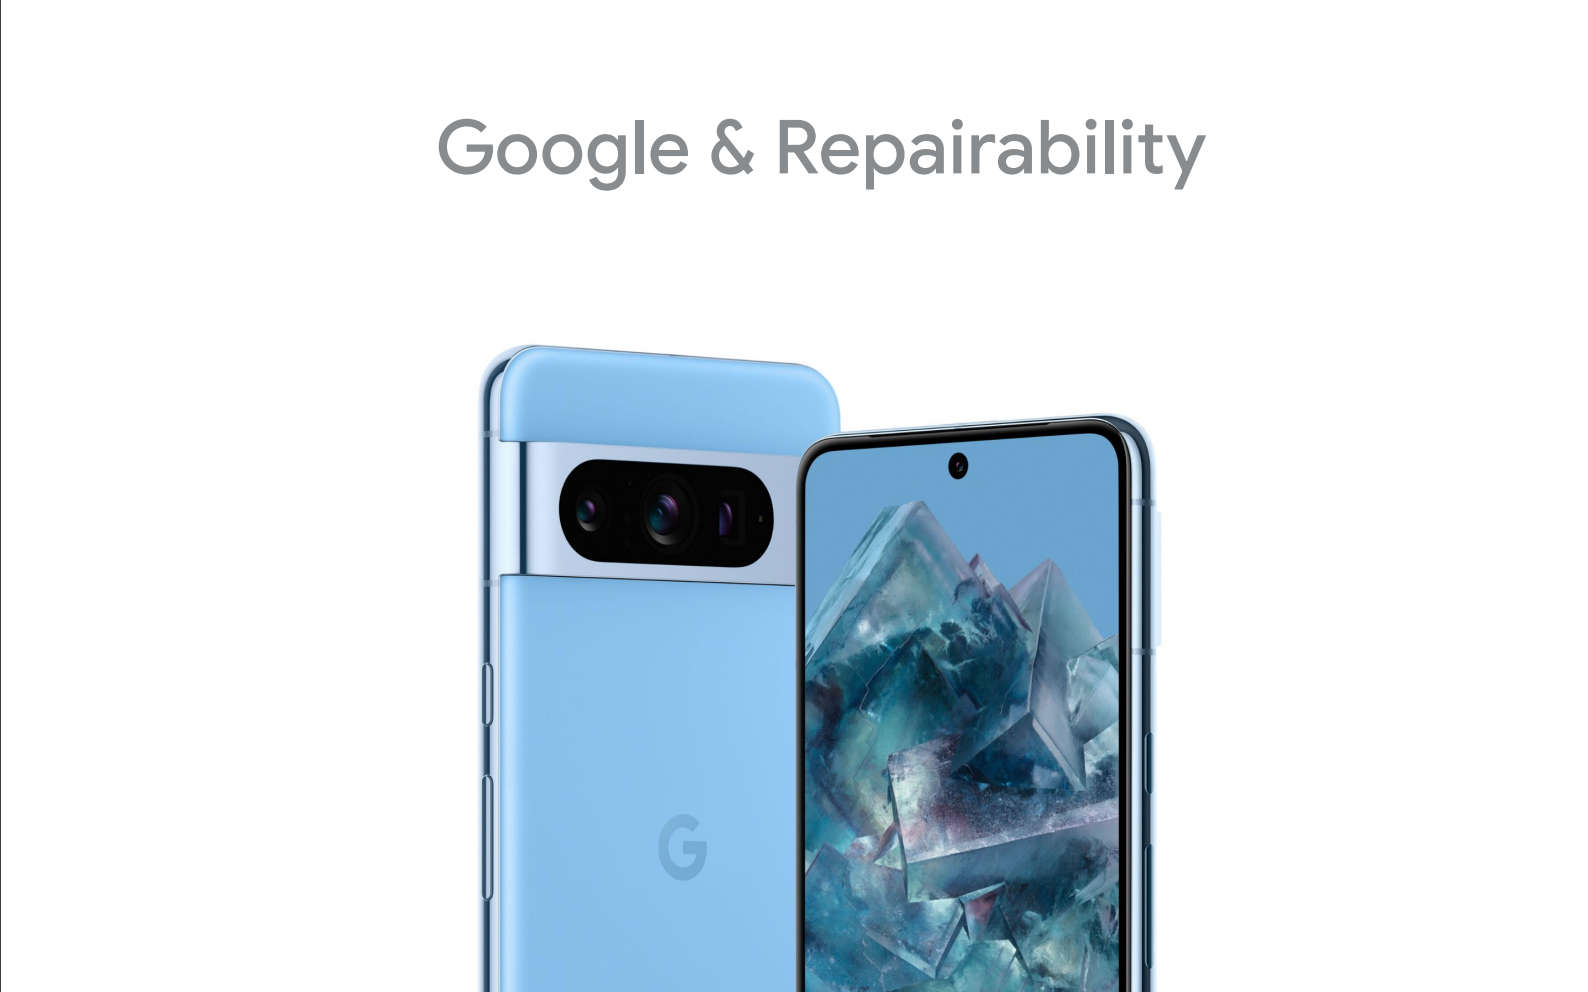 Google Formally Endorses Right to Repair, Will Lobby to Pass Repair Laws